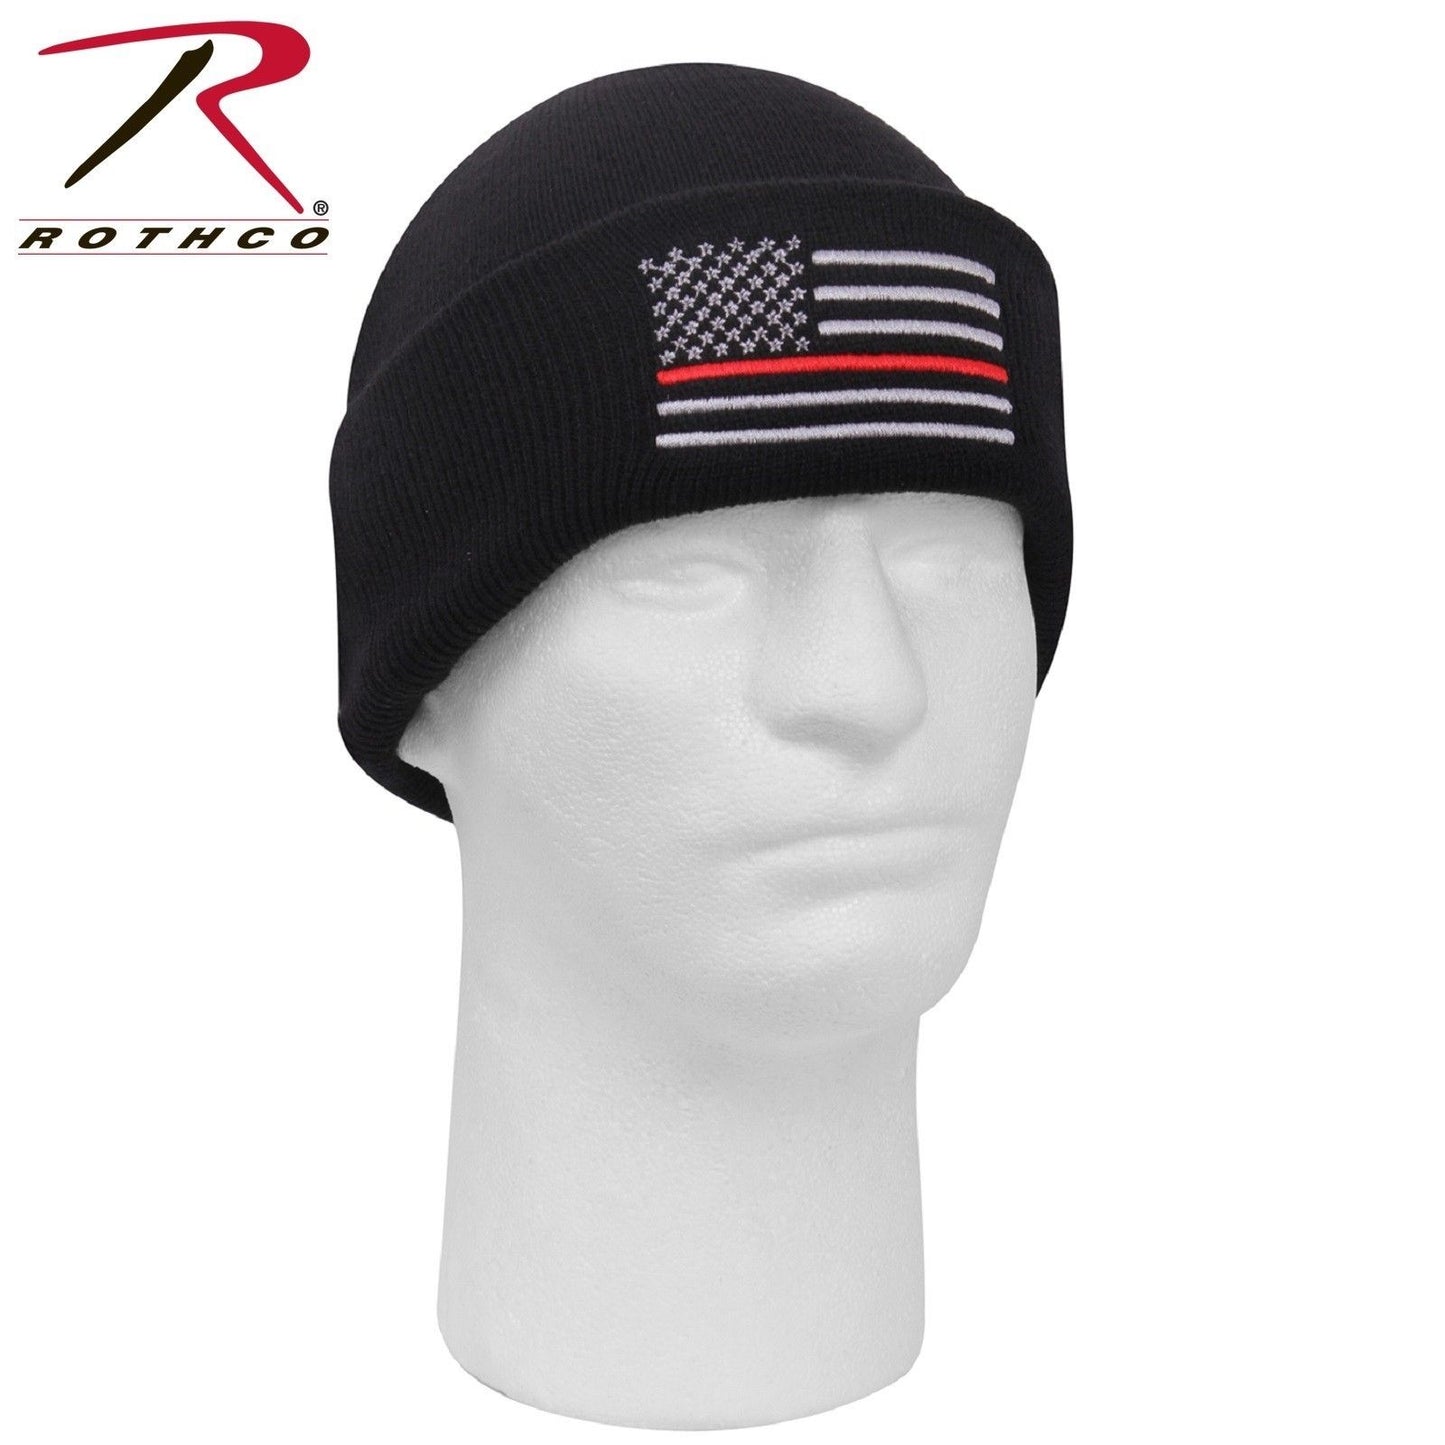 Rothco Deluxe Thin Red Line Watch Cap - Acrylic Winter Hat Beanie TRL FD Support